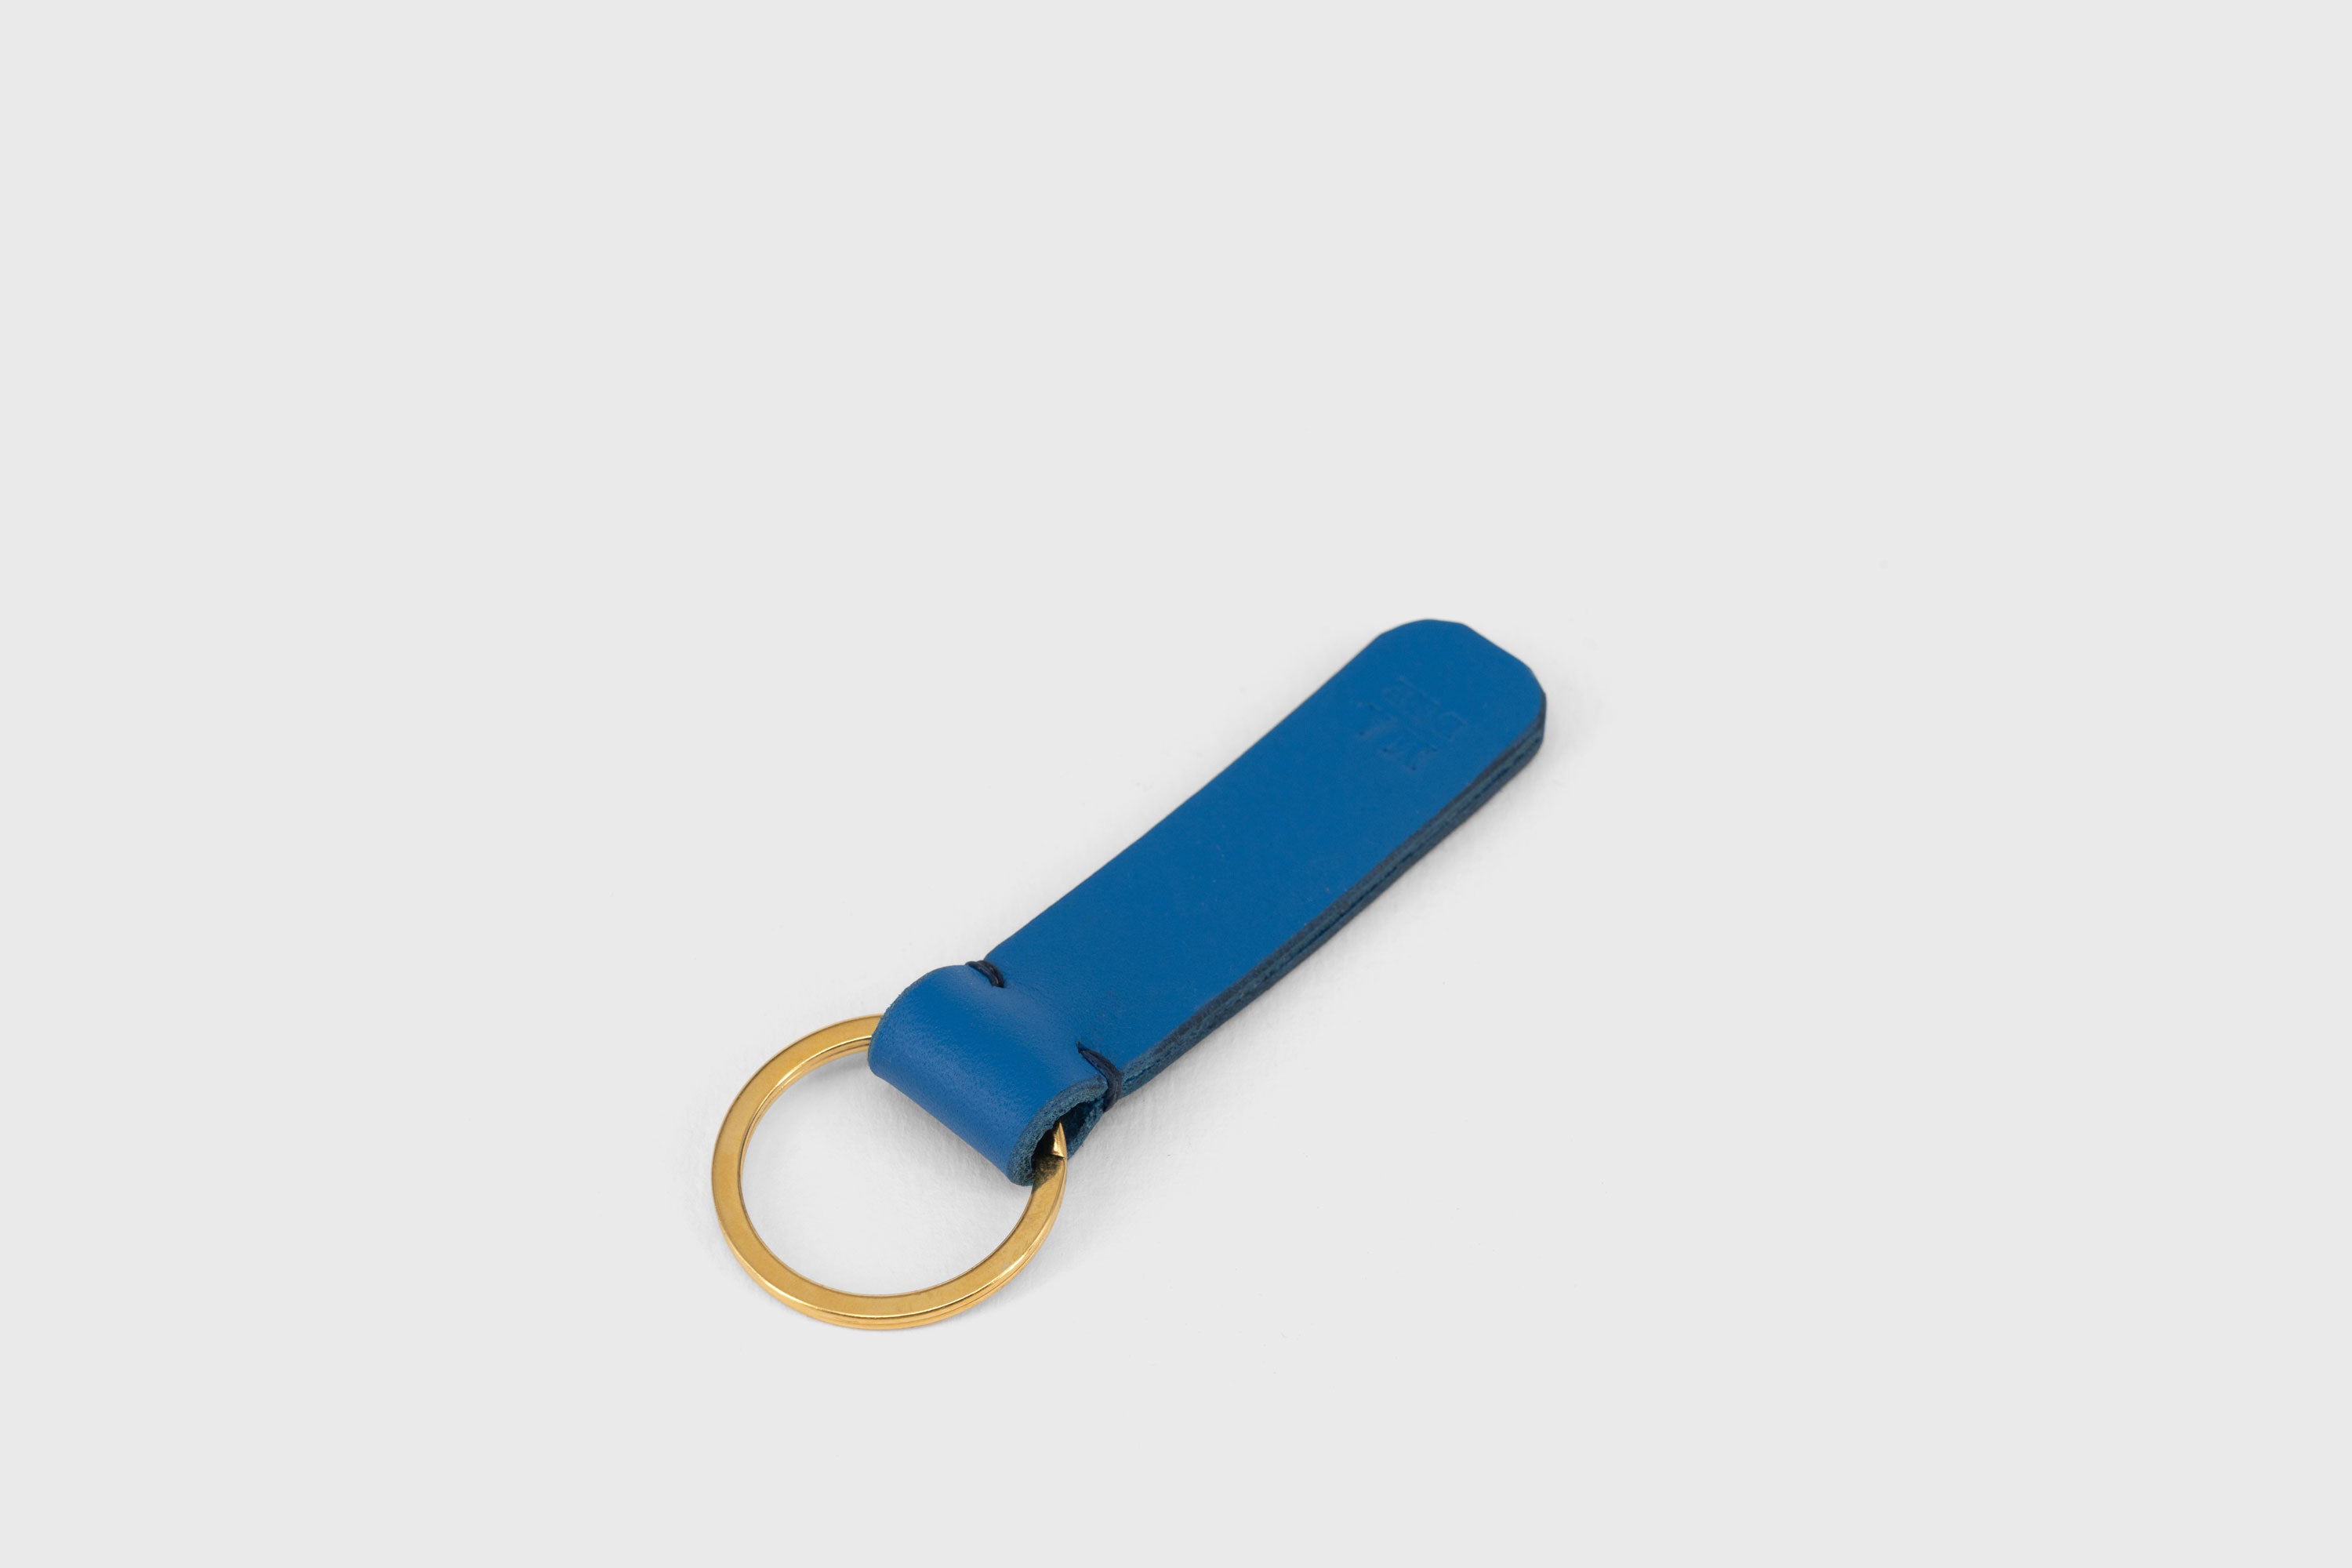 Key Ring Leather Royal Blue Color Fob Minimalist Designer Vegetable Tanned Full Grain Handcrafted Personalised Premium Quality Gold Atelier Madre Manuel Dreesmann Barcelona Spain